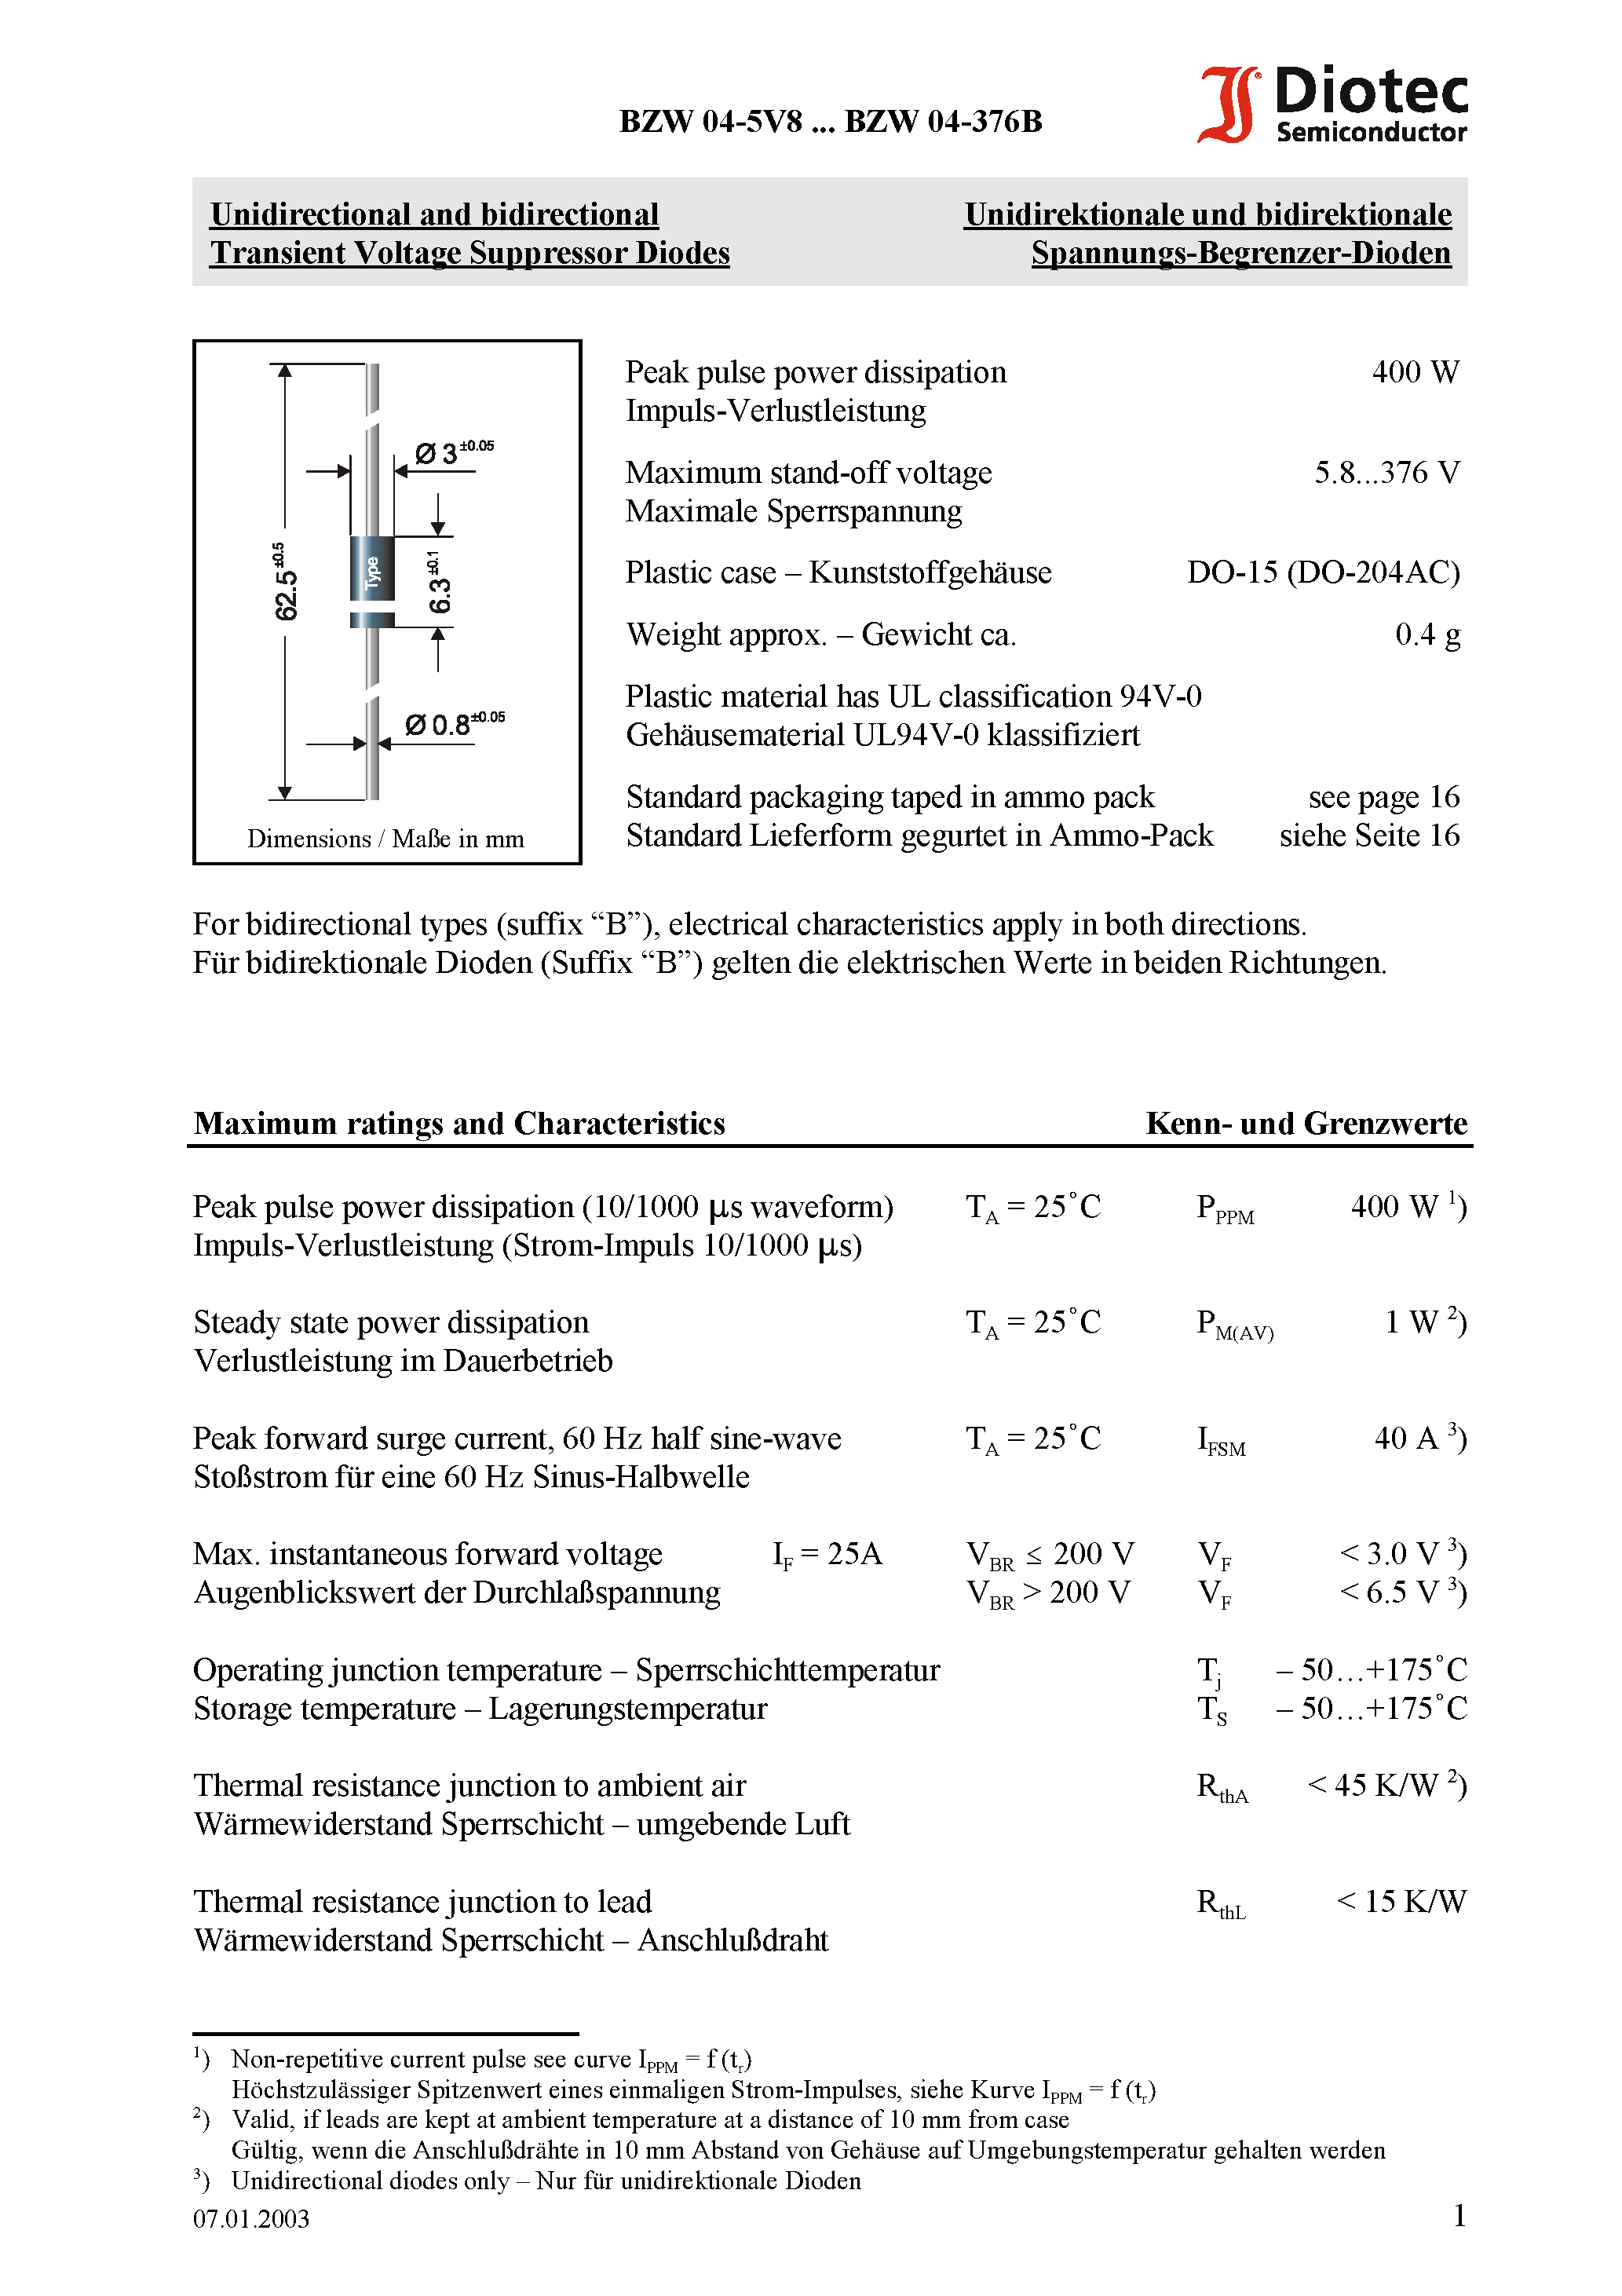 Datasheet BZW04-145 - Unidirectional and bidirectional Transient Voltage Suppressor Diodes page 1